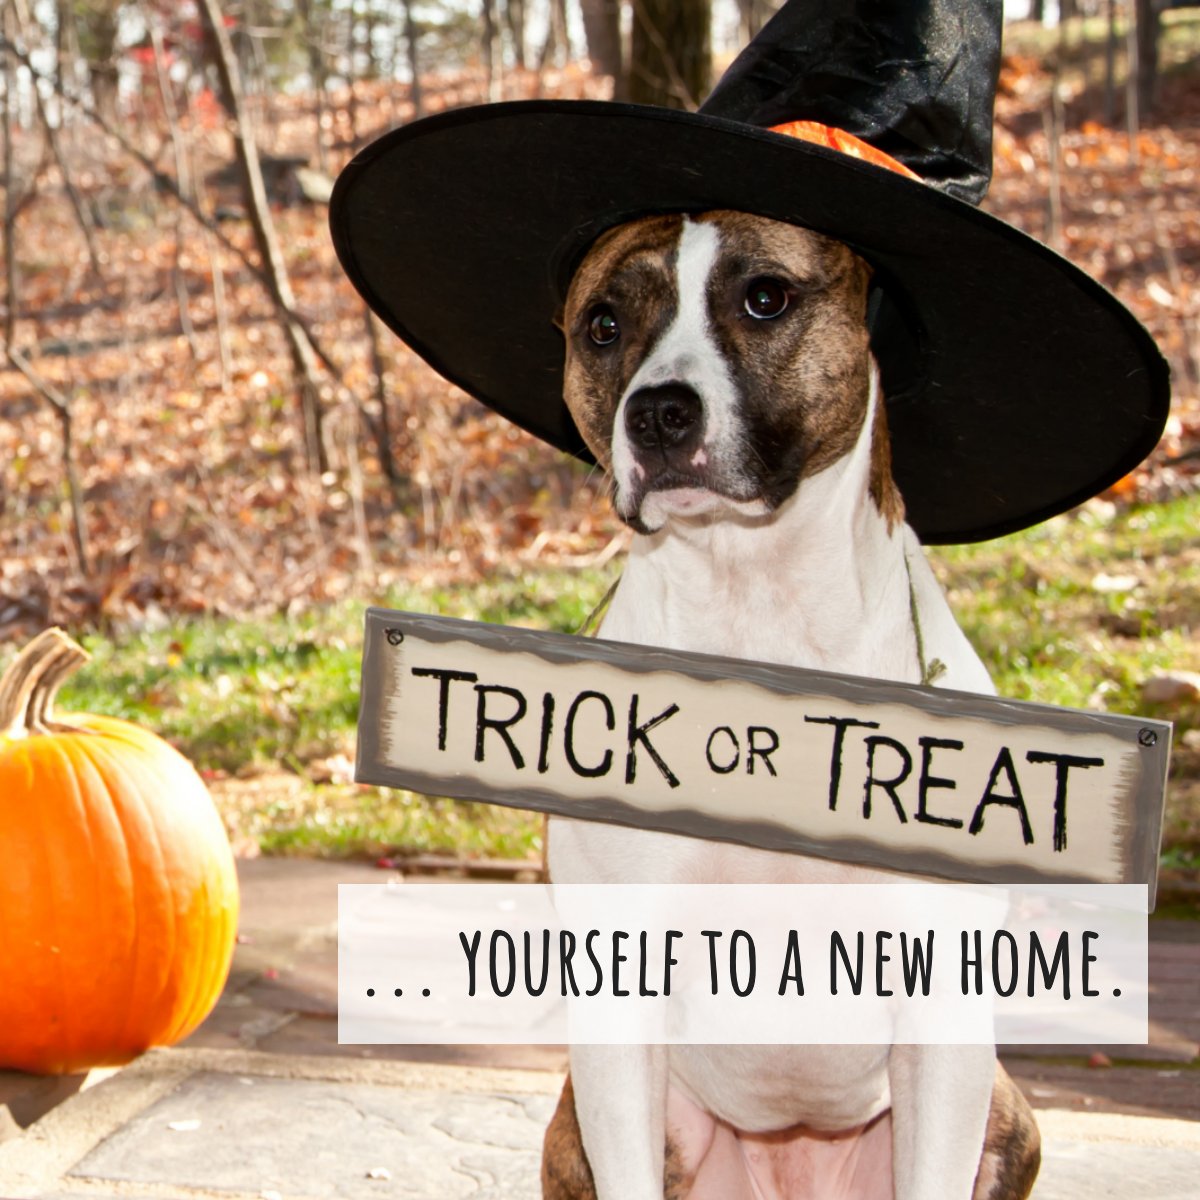 What better treat for this Halloween Season than a great home 🏡

Don't get spooked away and start your search now! 👻

#halloween #halloweenseason #trickortreat #newhome
#realtorrondascott #bhhsjacksonville #realestatejacksonvillenc #getyourhomesold